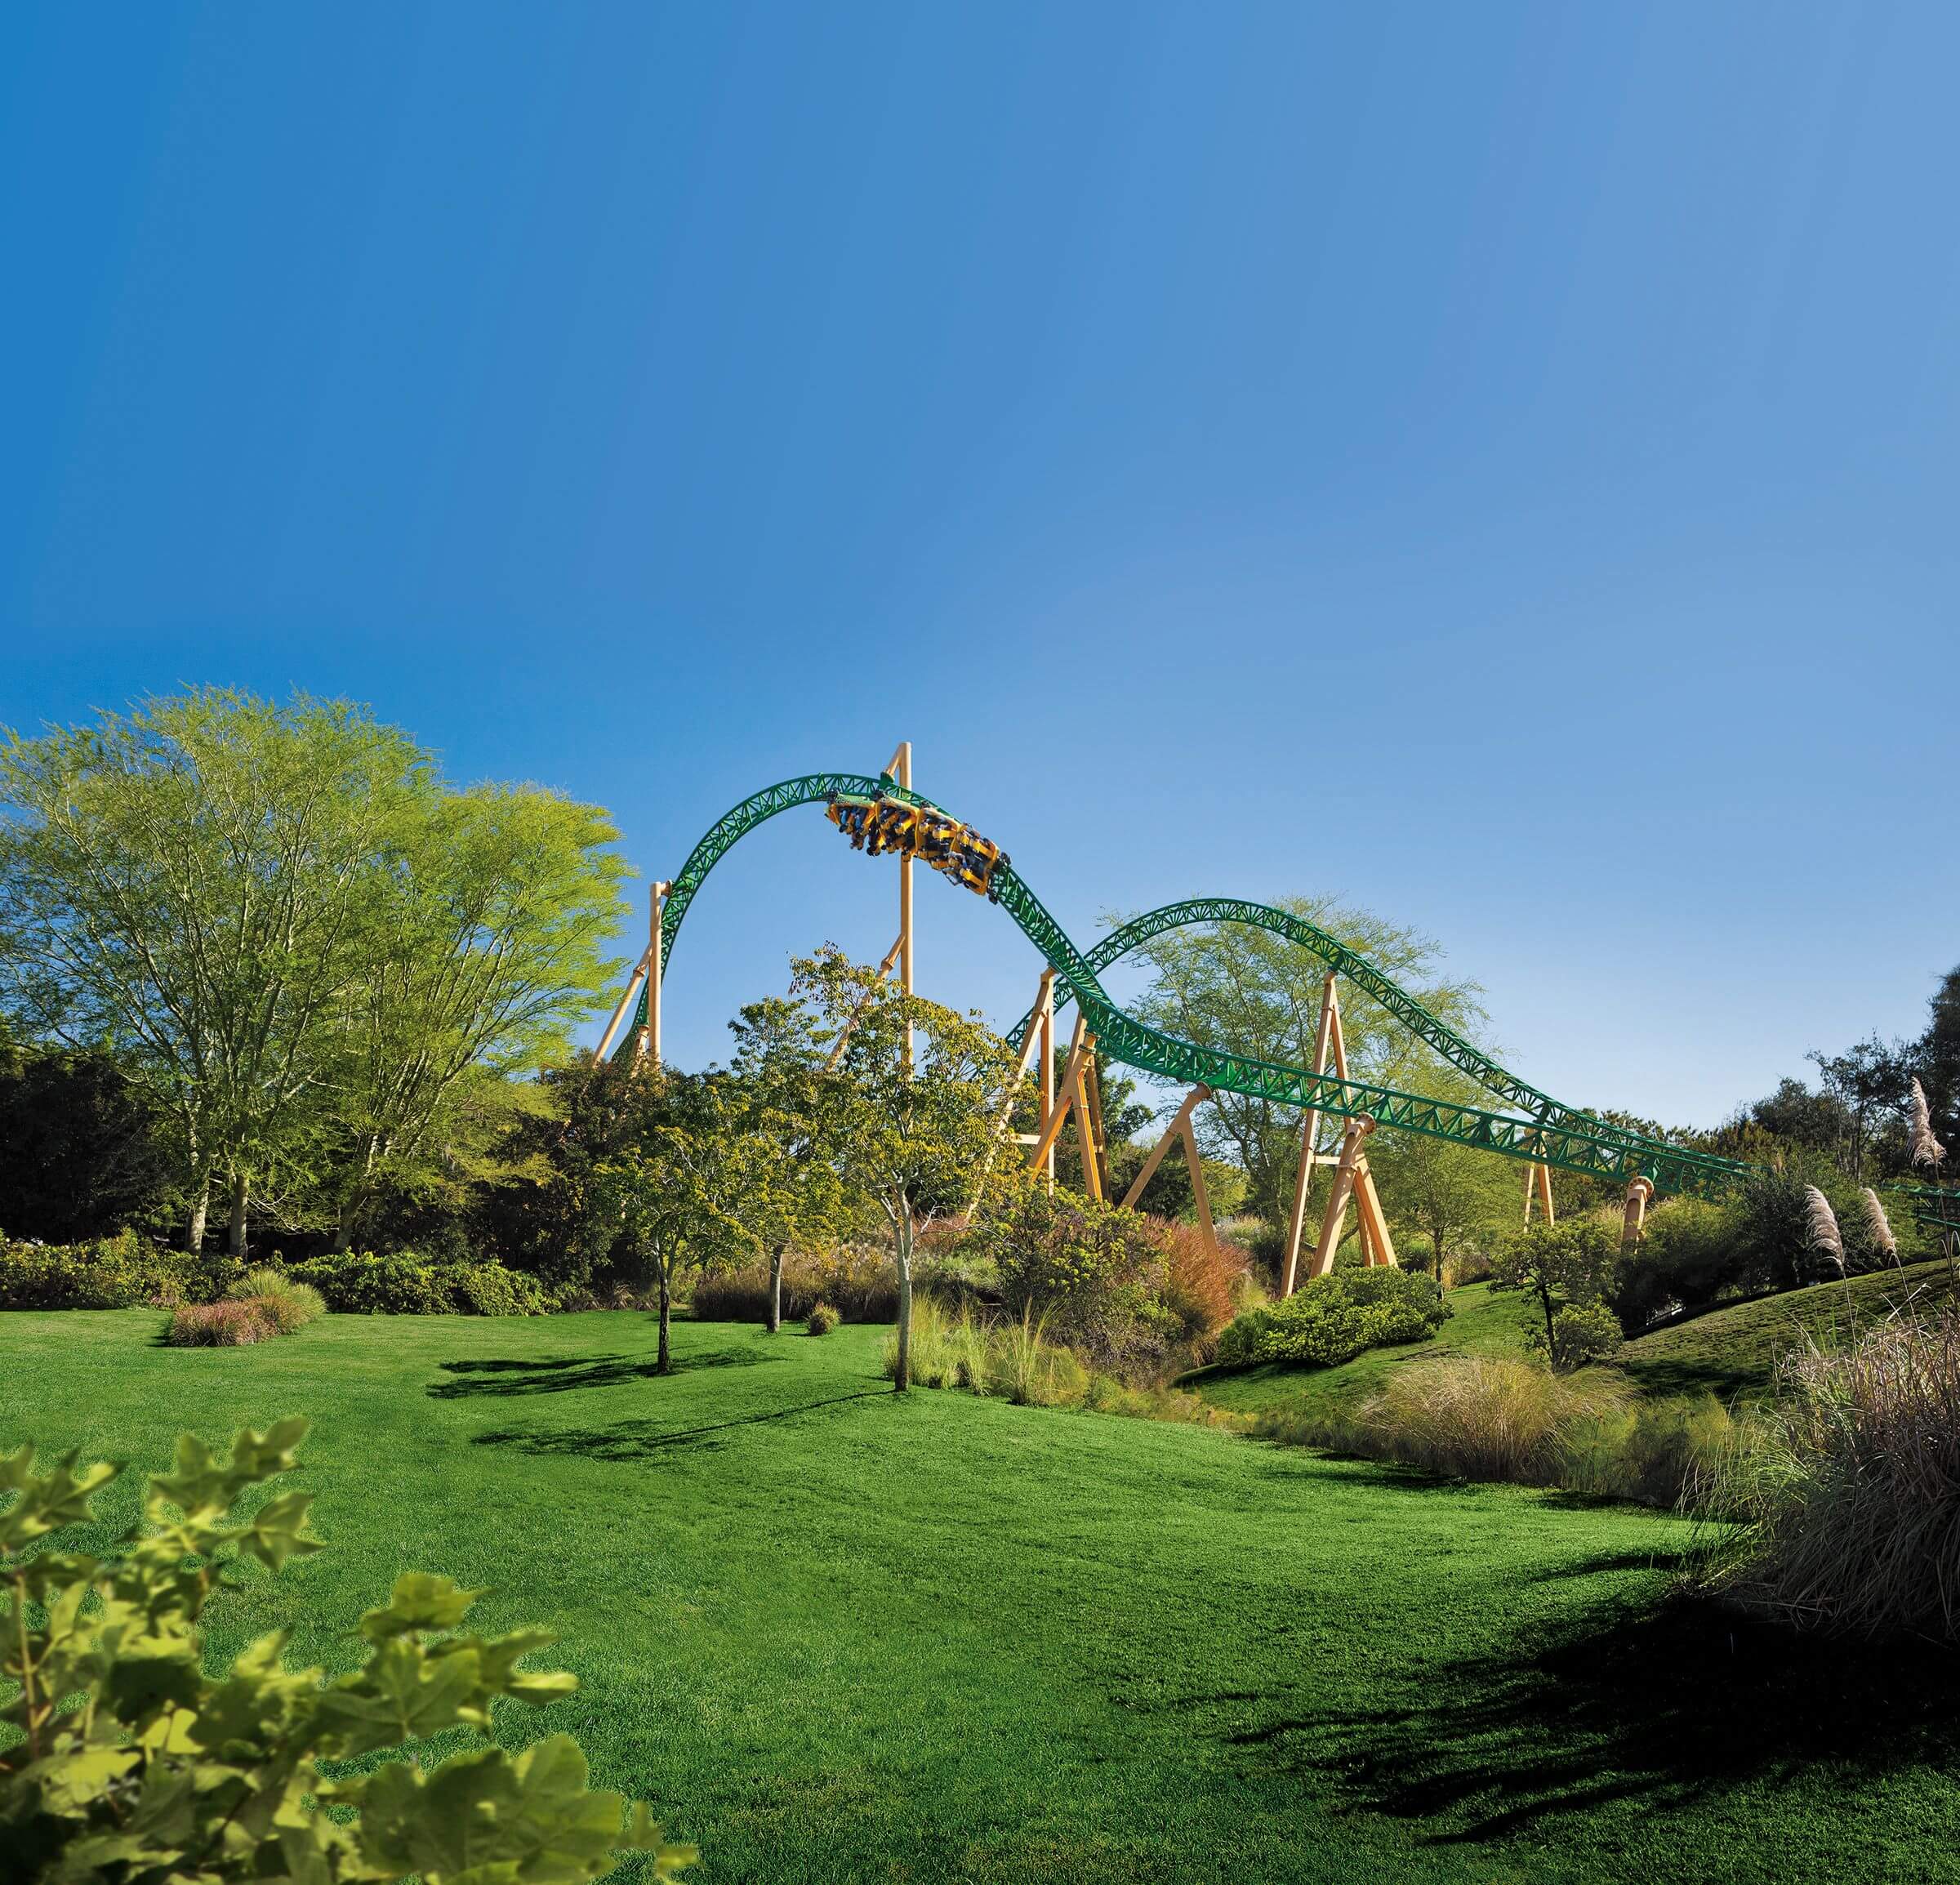 A large green field with a green roller coaster in the background.